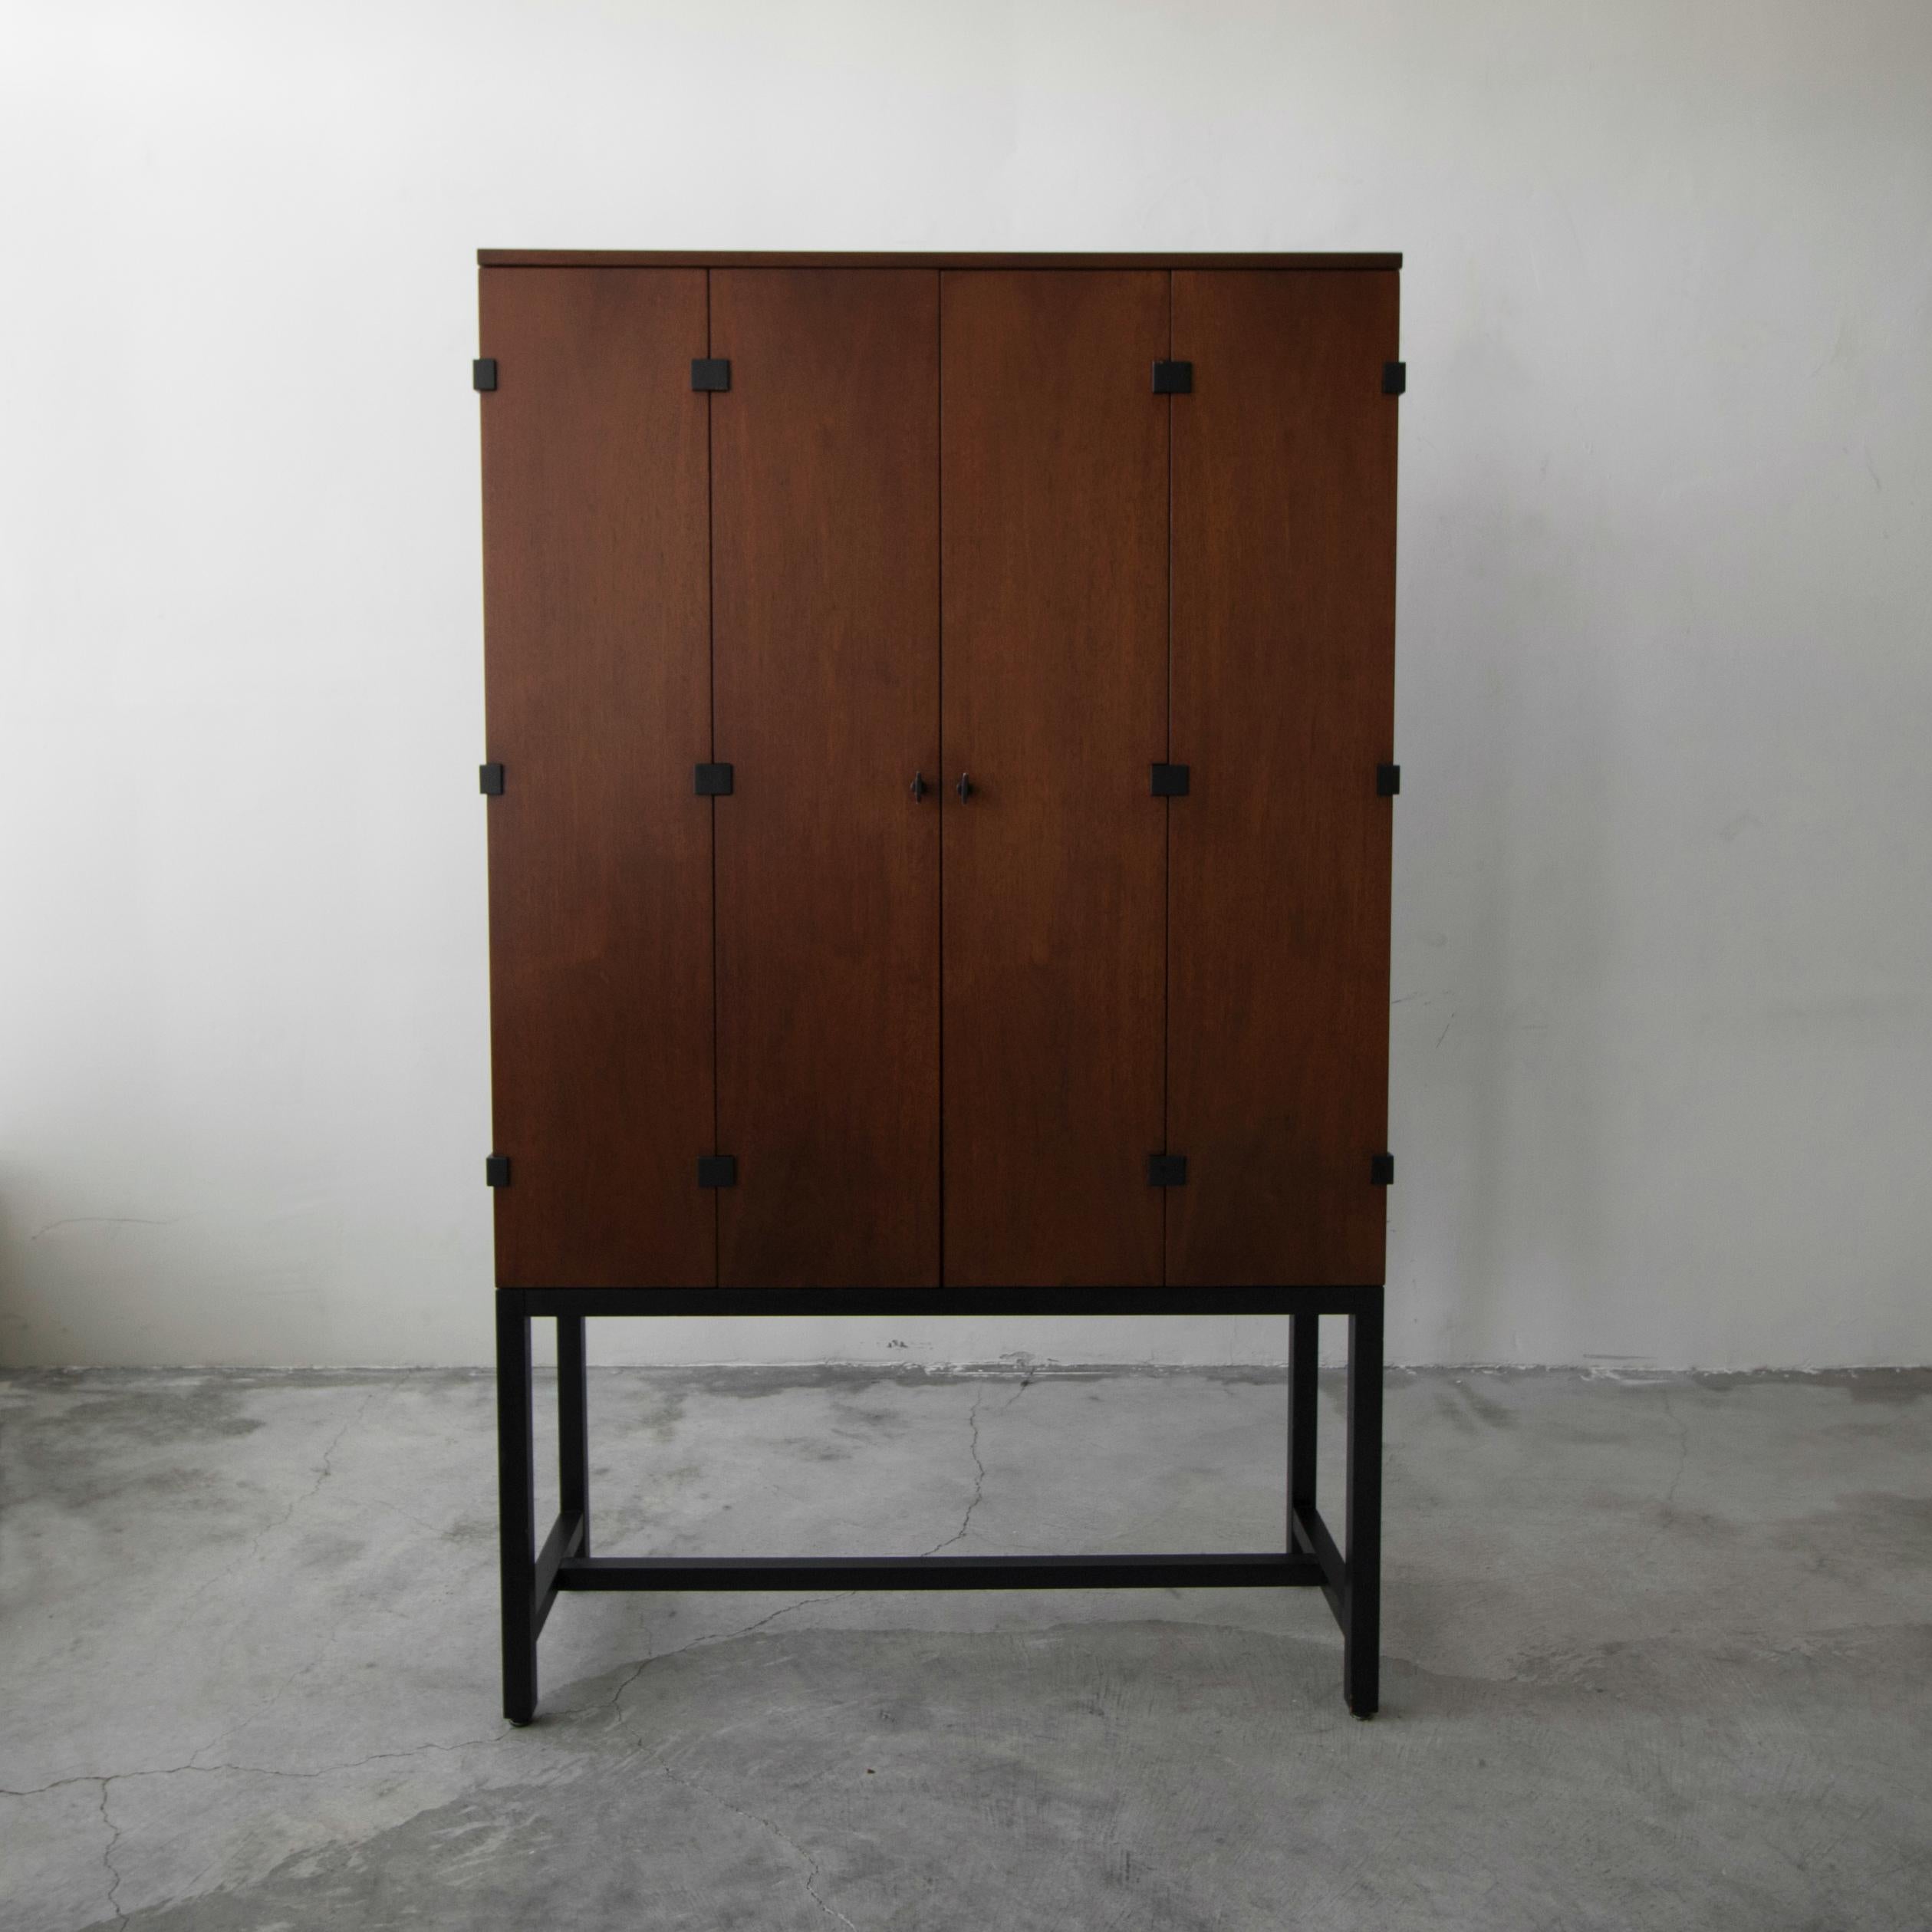 Beautiful midcentury walnut cabinet by Milo Baughman for Directional. Cabinet is beautiful walnut with black details, it features 2 bi-fold front doors with ample shelving and drawers inside for storage. A simple, vintage piece with modern appeal